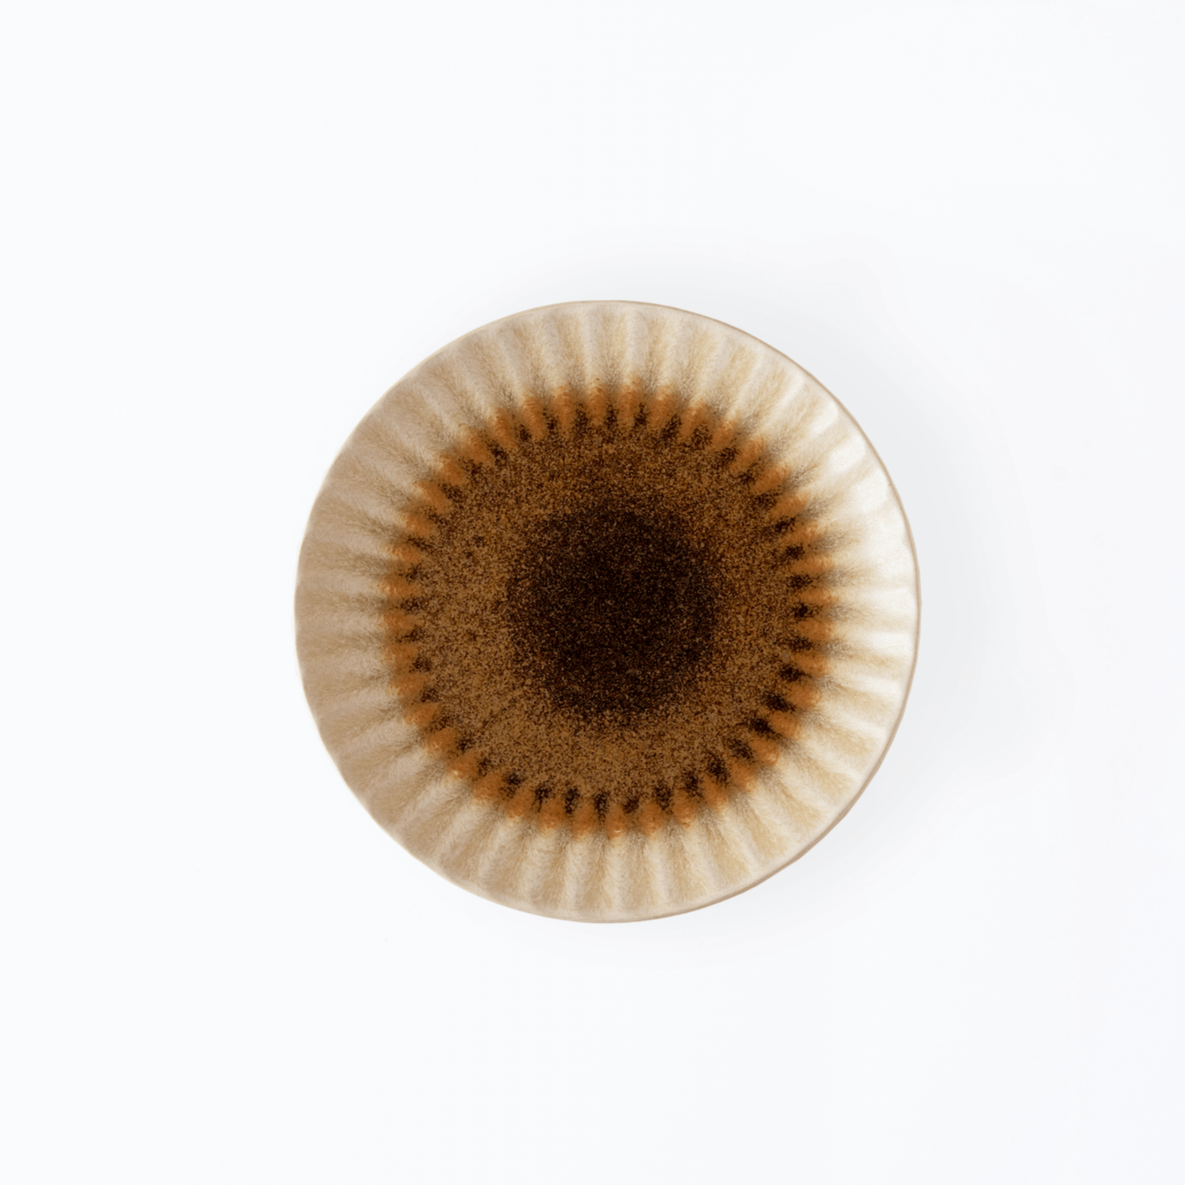 Colares | Dinner Plate Brown Satin